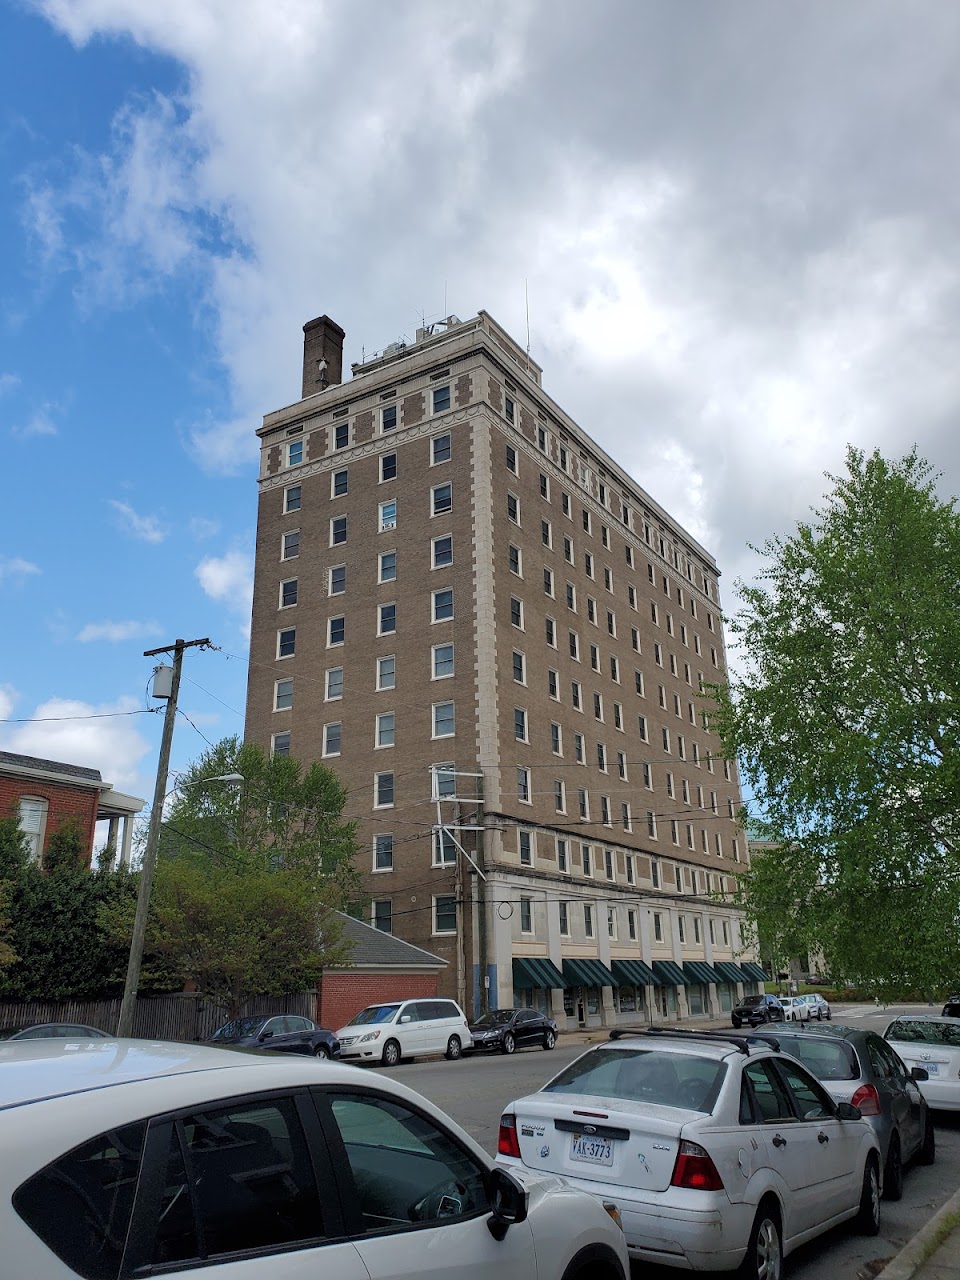 Photo of WILLIAM BYRD. Affordable housing located at 2501 W BROAD STREET RICHMOND, VA 23220